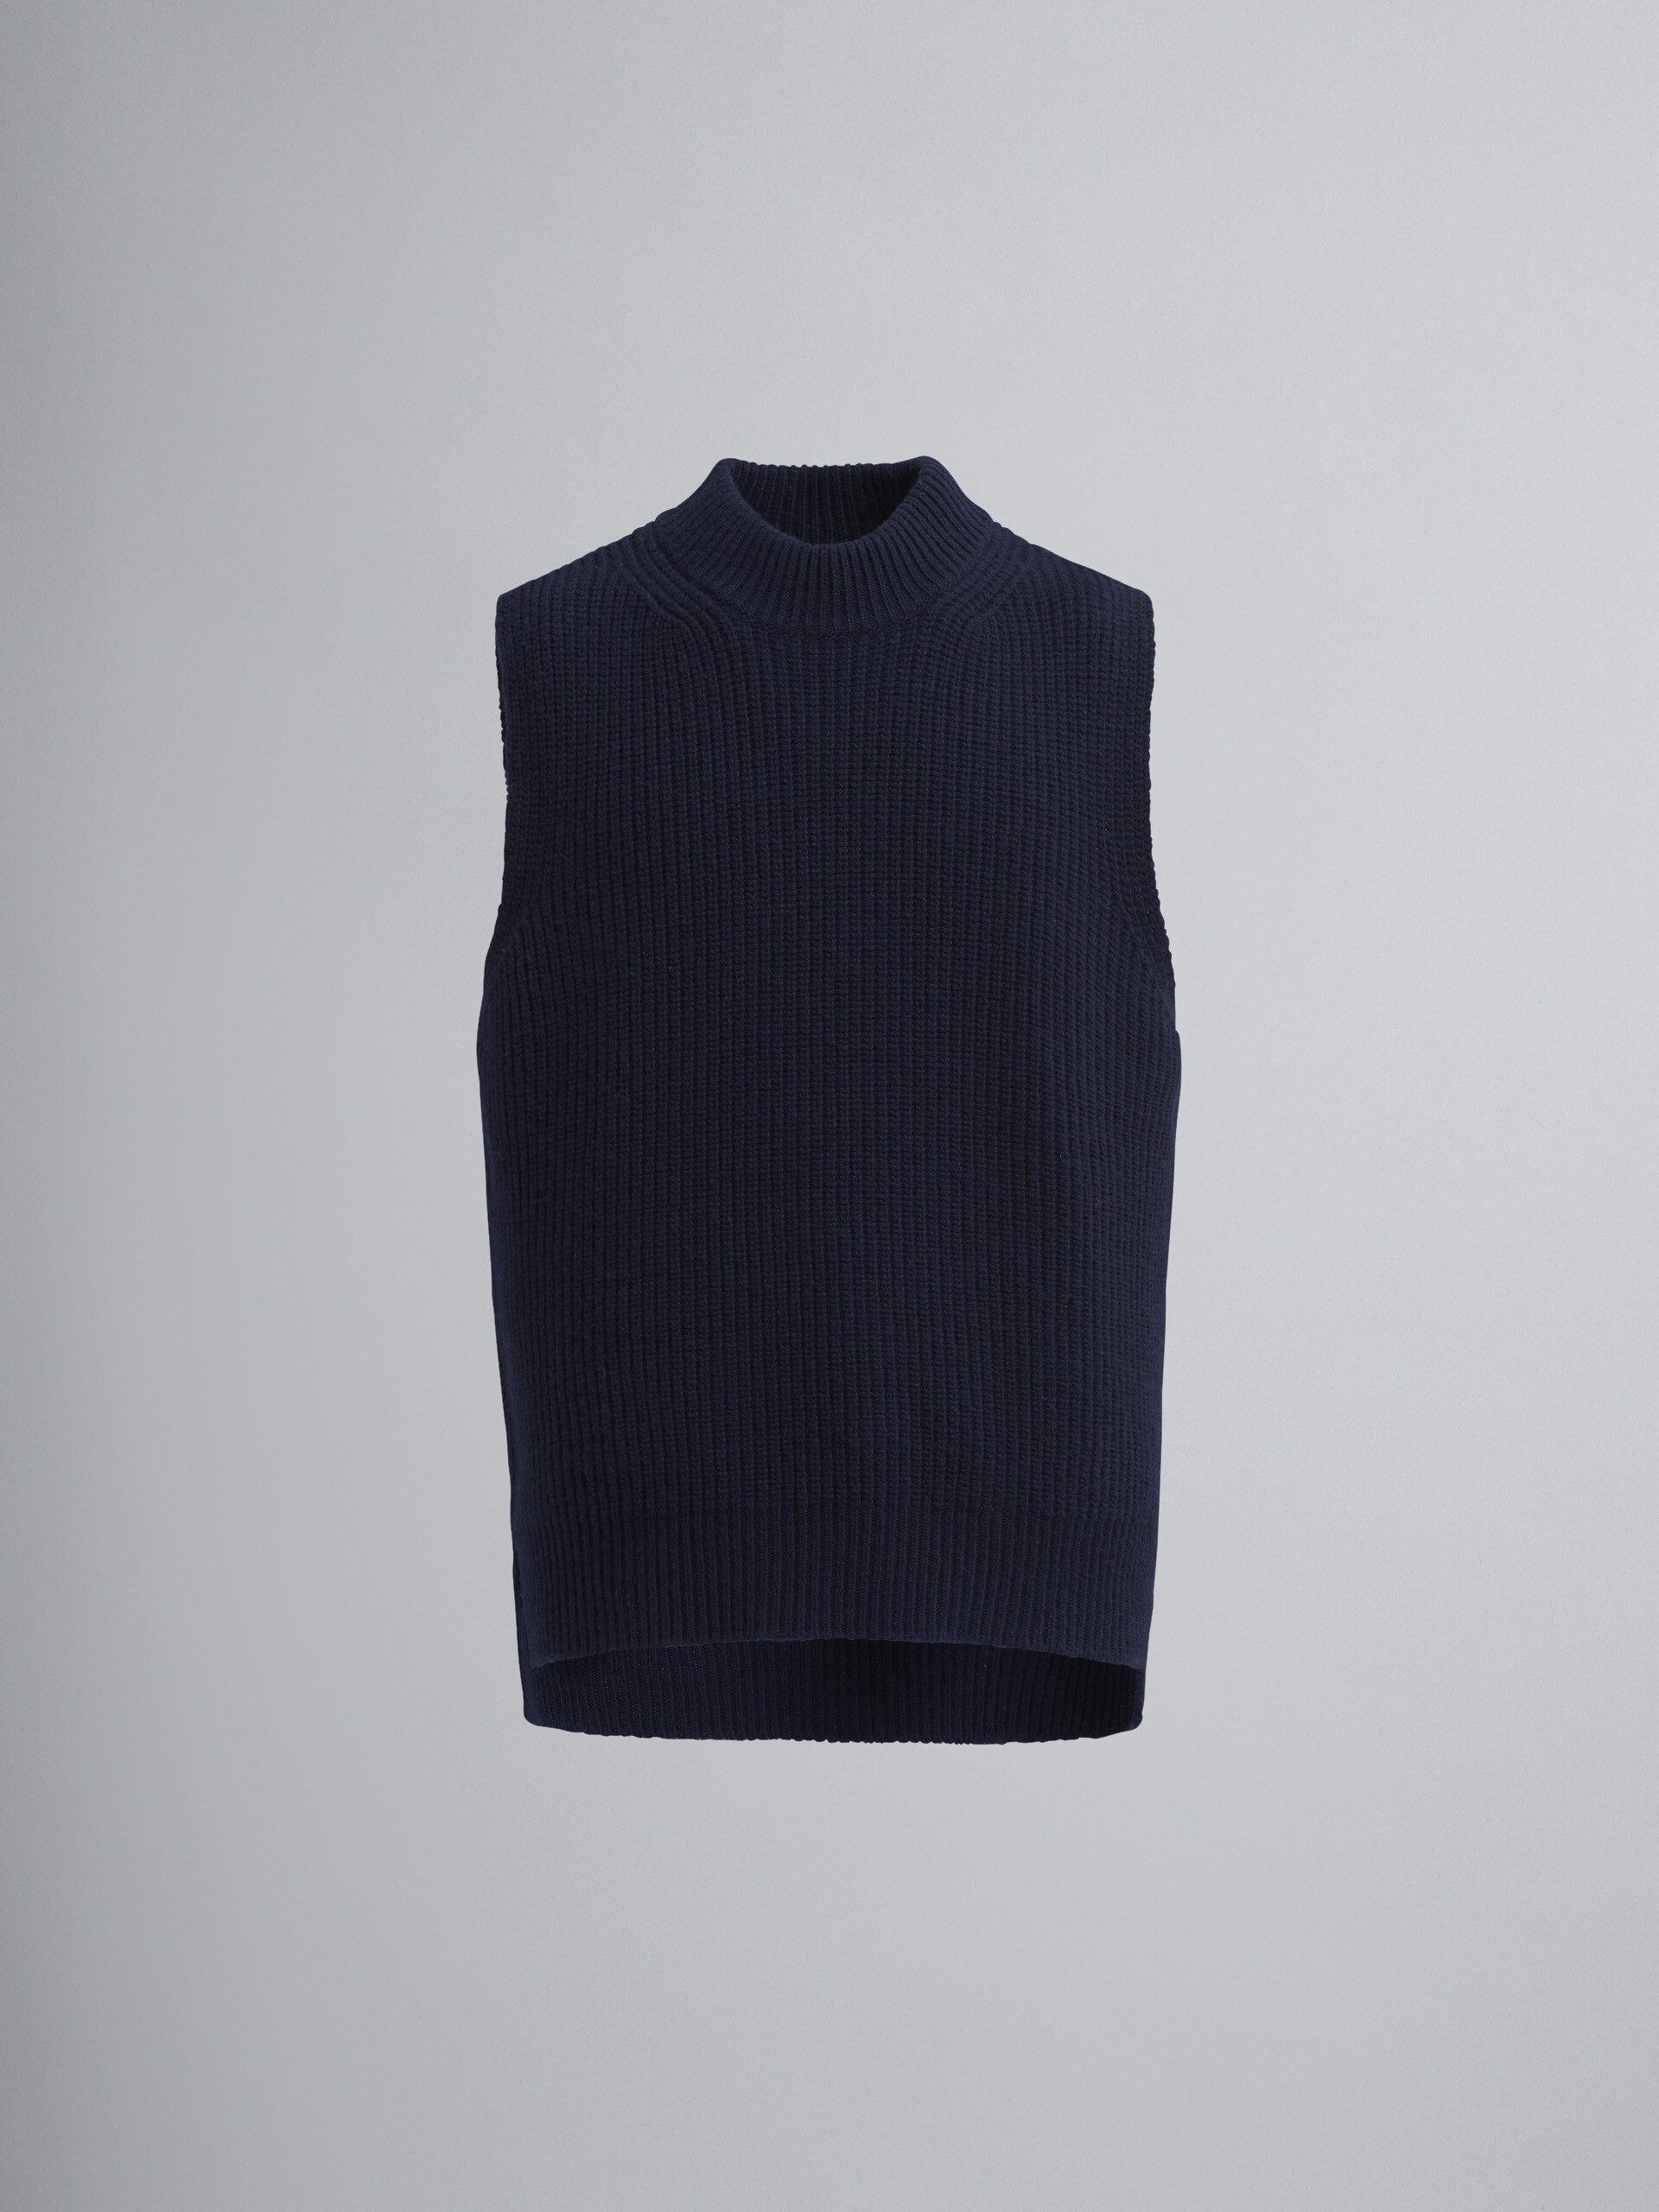 Asymmetric carded wool vest - Pullovers - Image 1